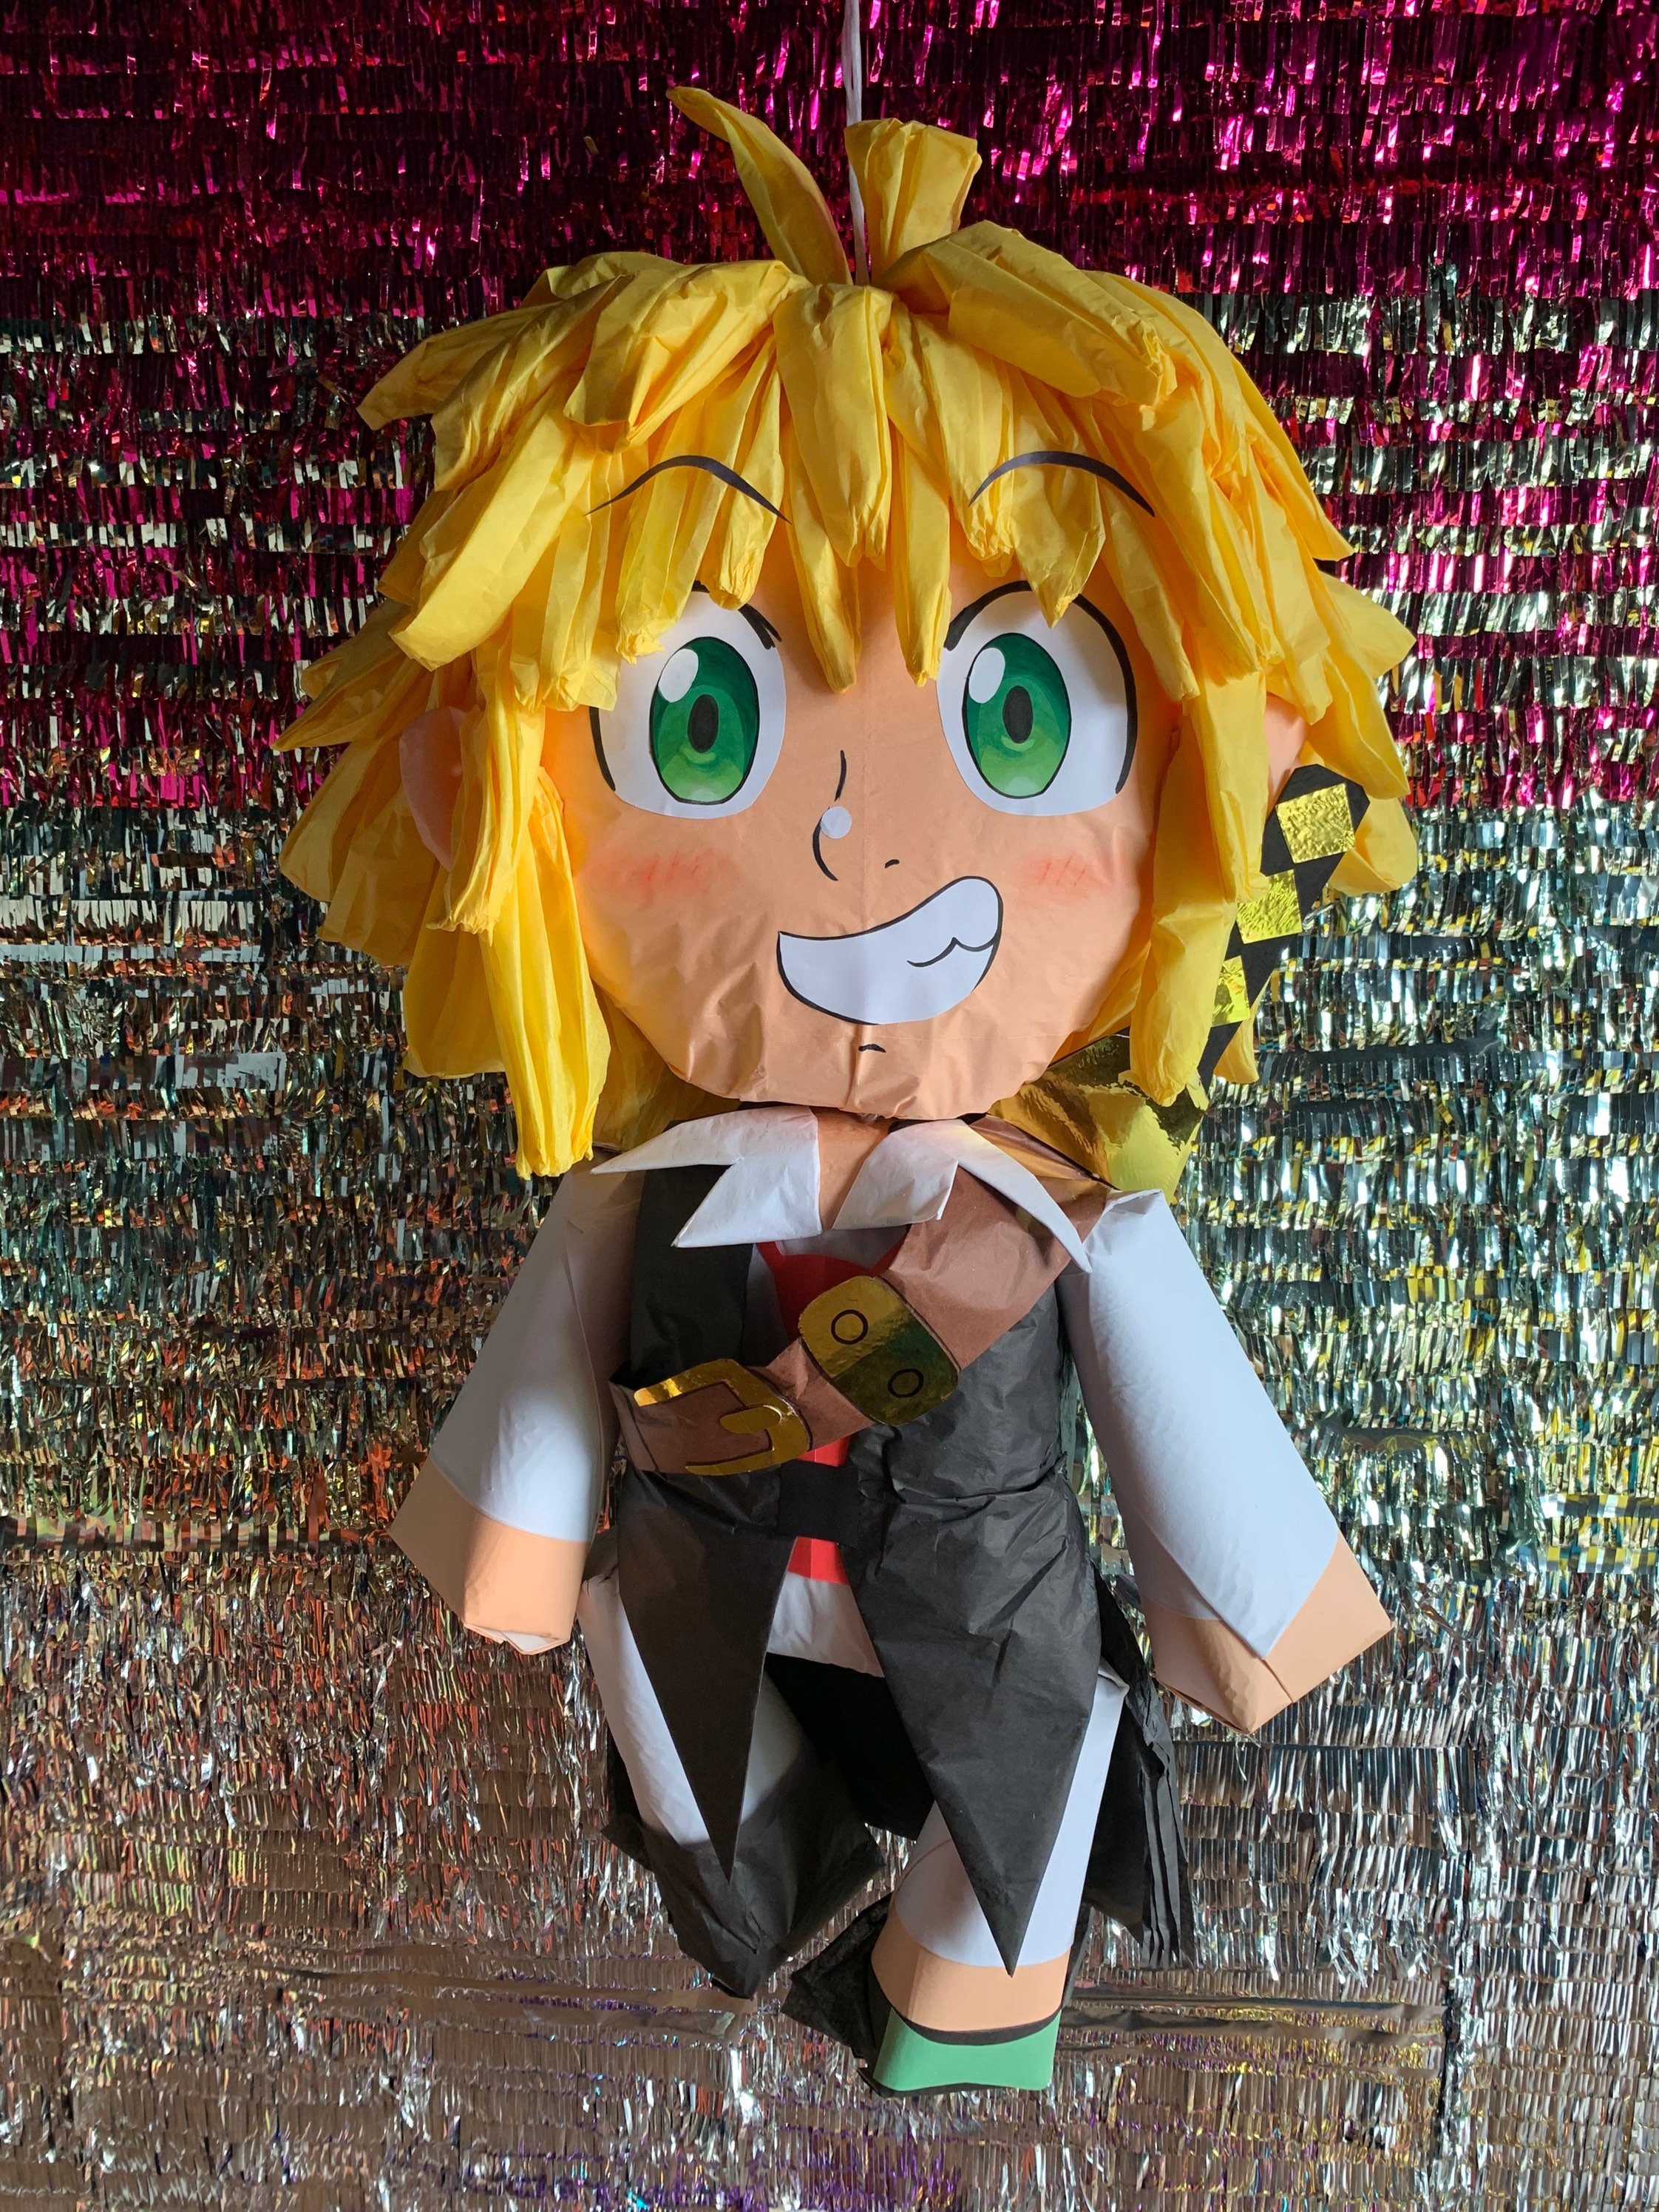 Buy Custom Anime Character Pinata Movable Limbs Interactive Online in India   Etsy